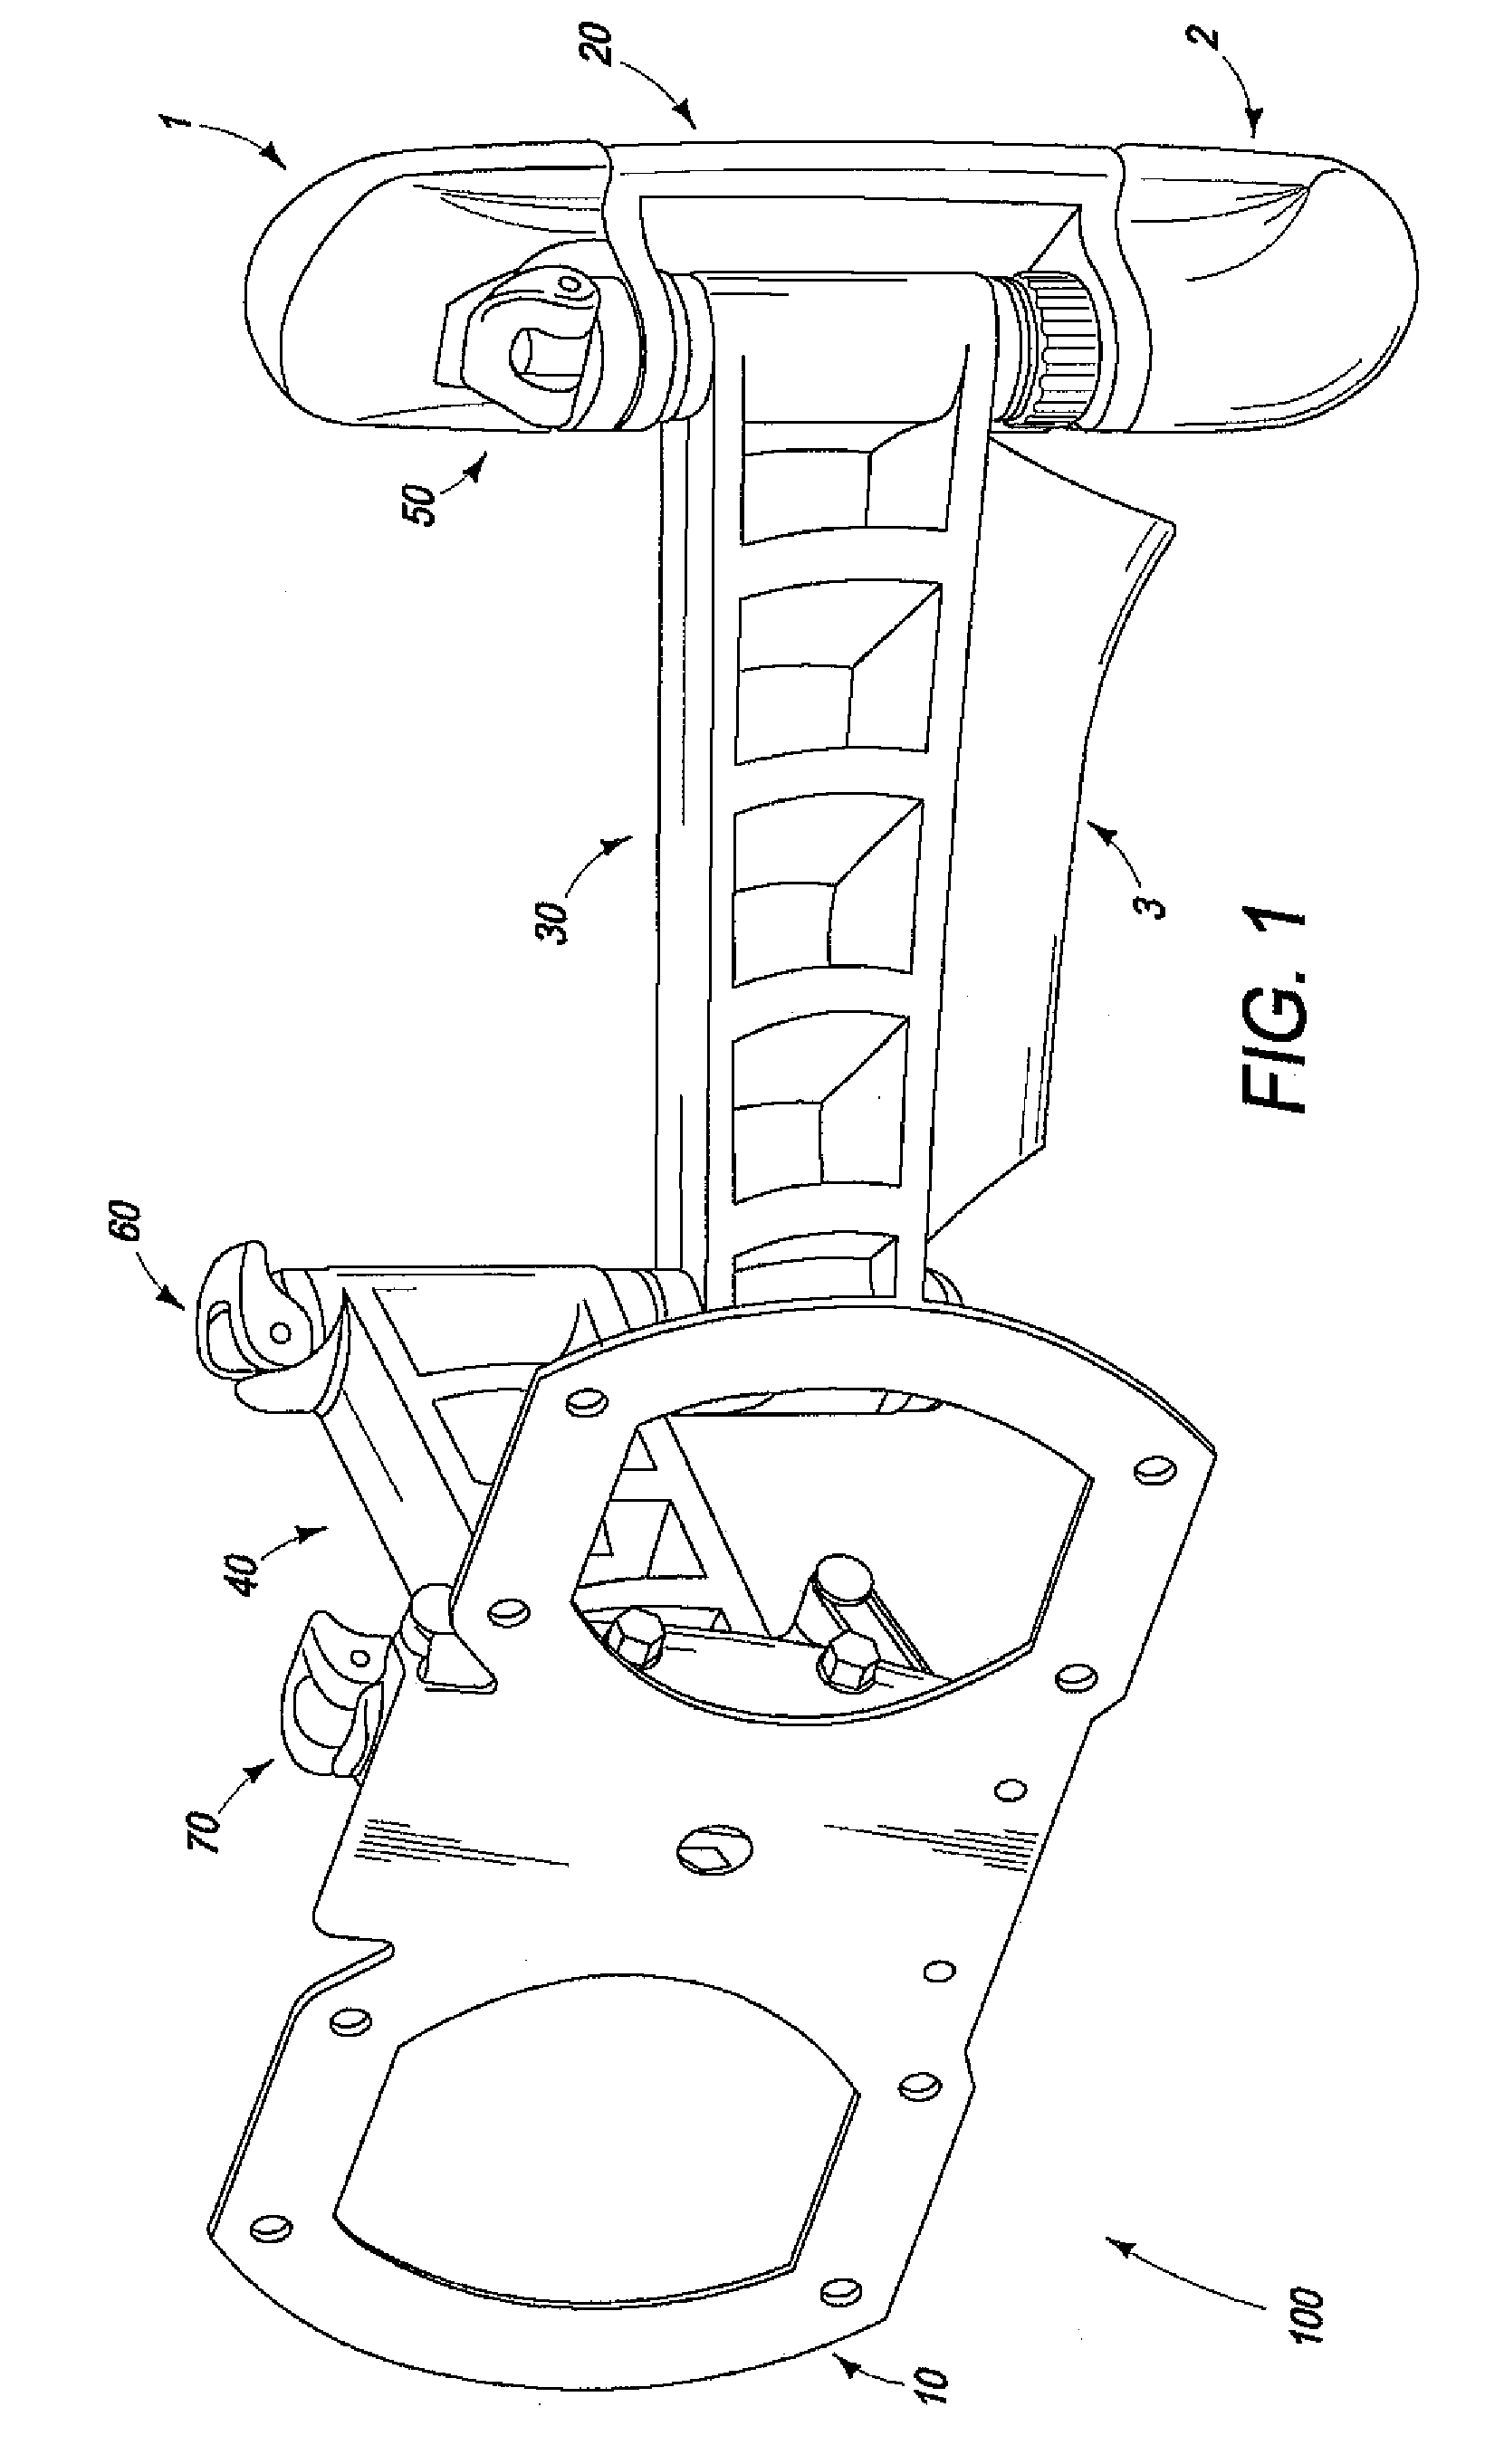 Cam lock for cantilever mounting device